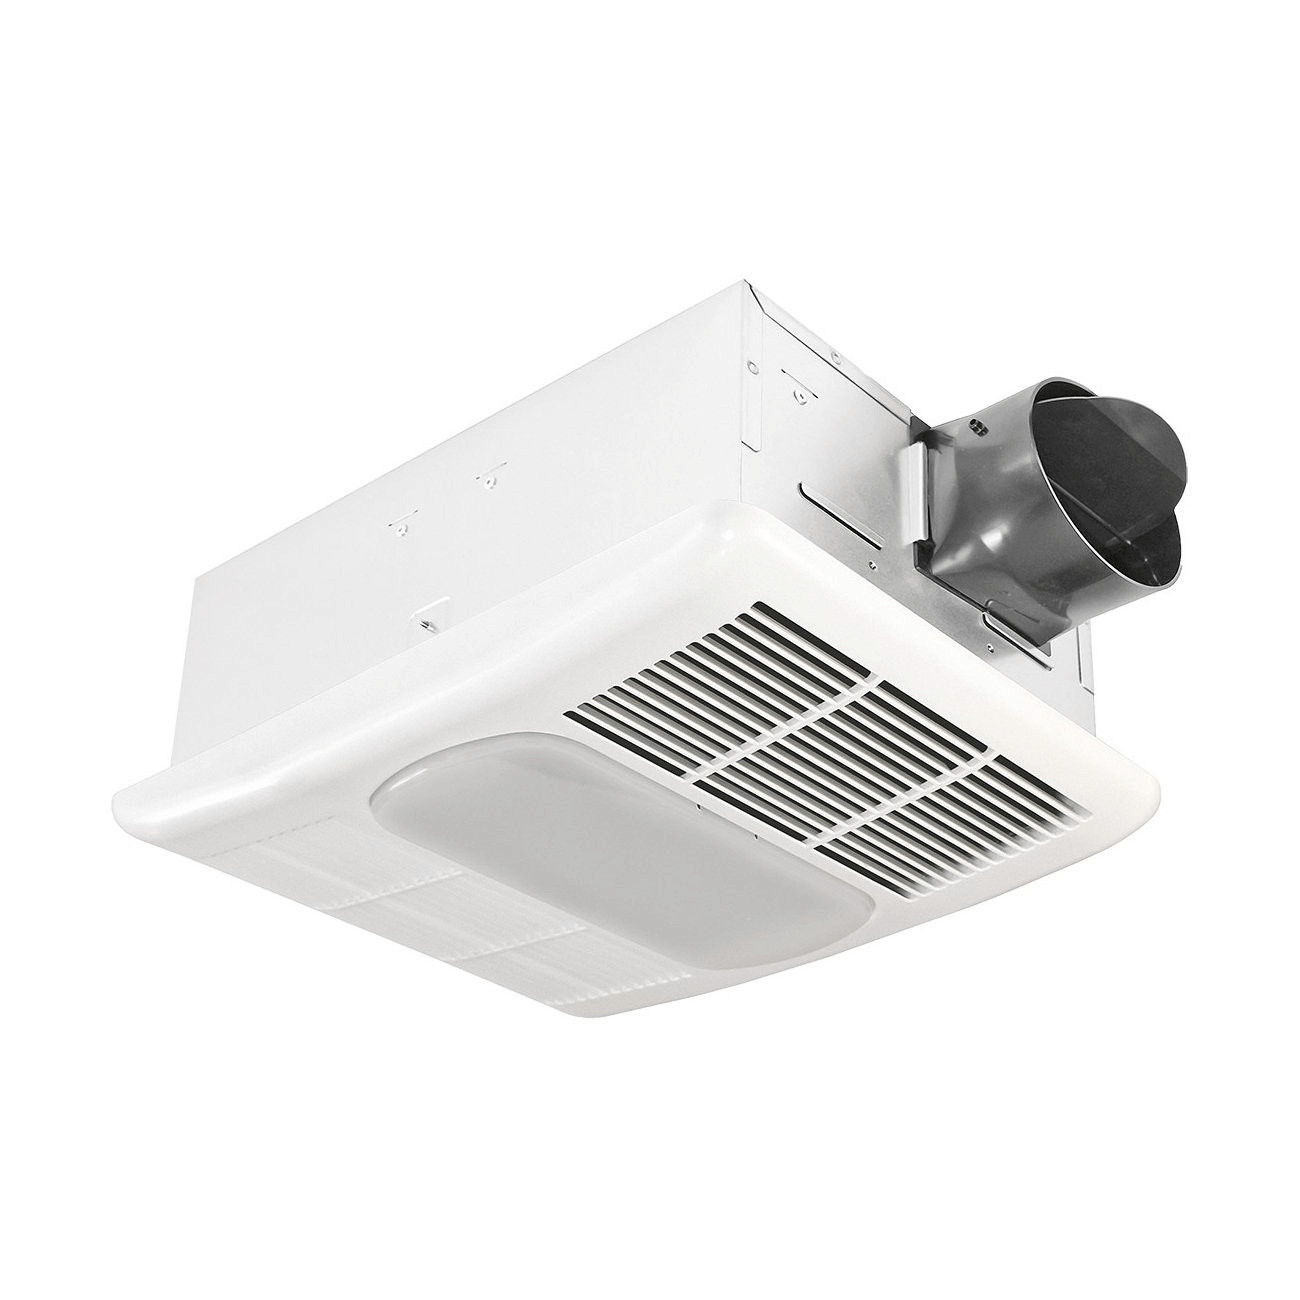 Bathroom Exhaust Fan With Heater
 Amazing Tips on How to Clean a Bathroom Exhaust Fan in 10